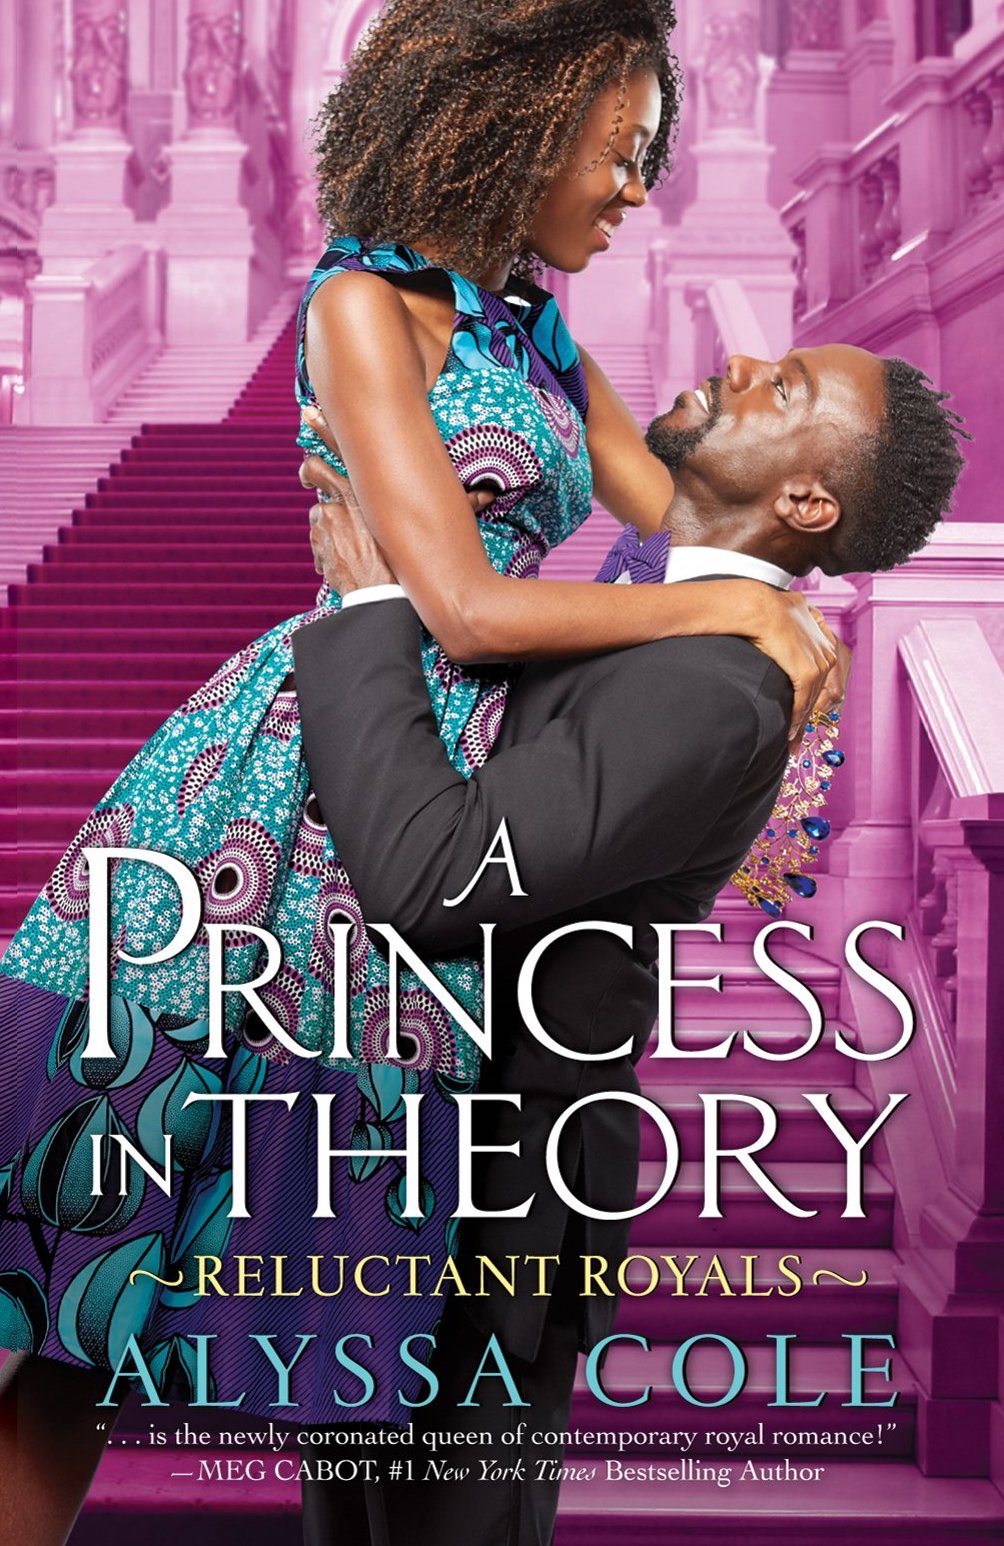 A Princess in Theory // Reluctant Royals